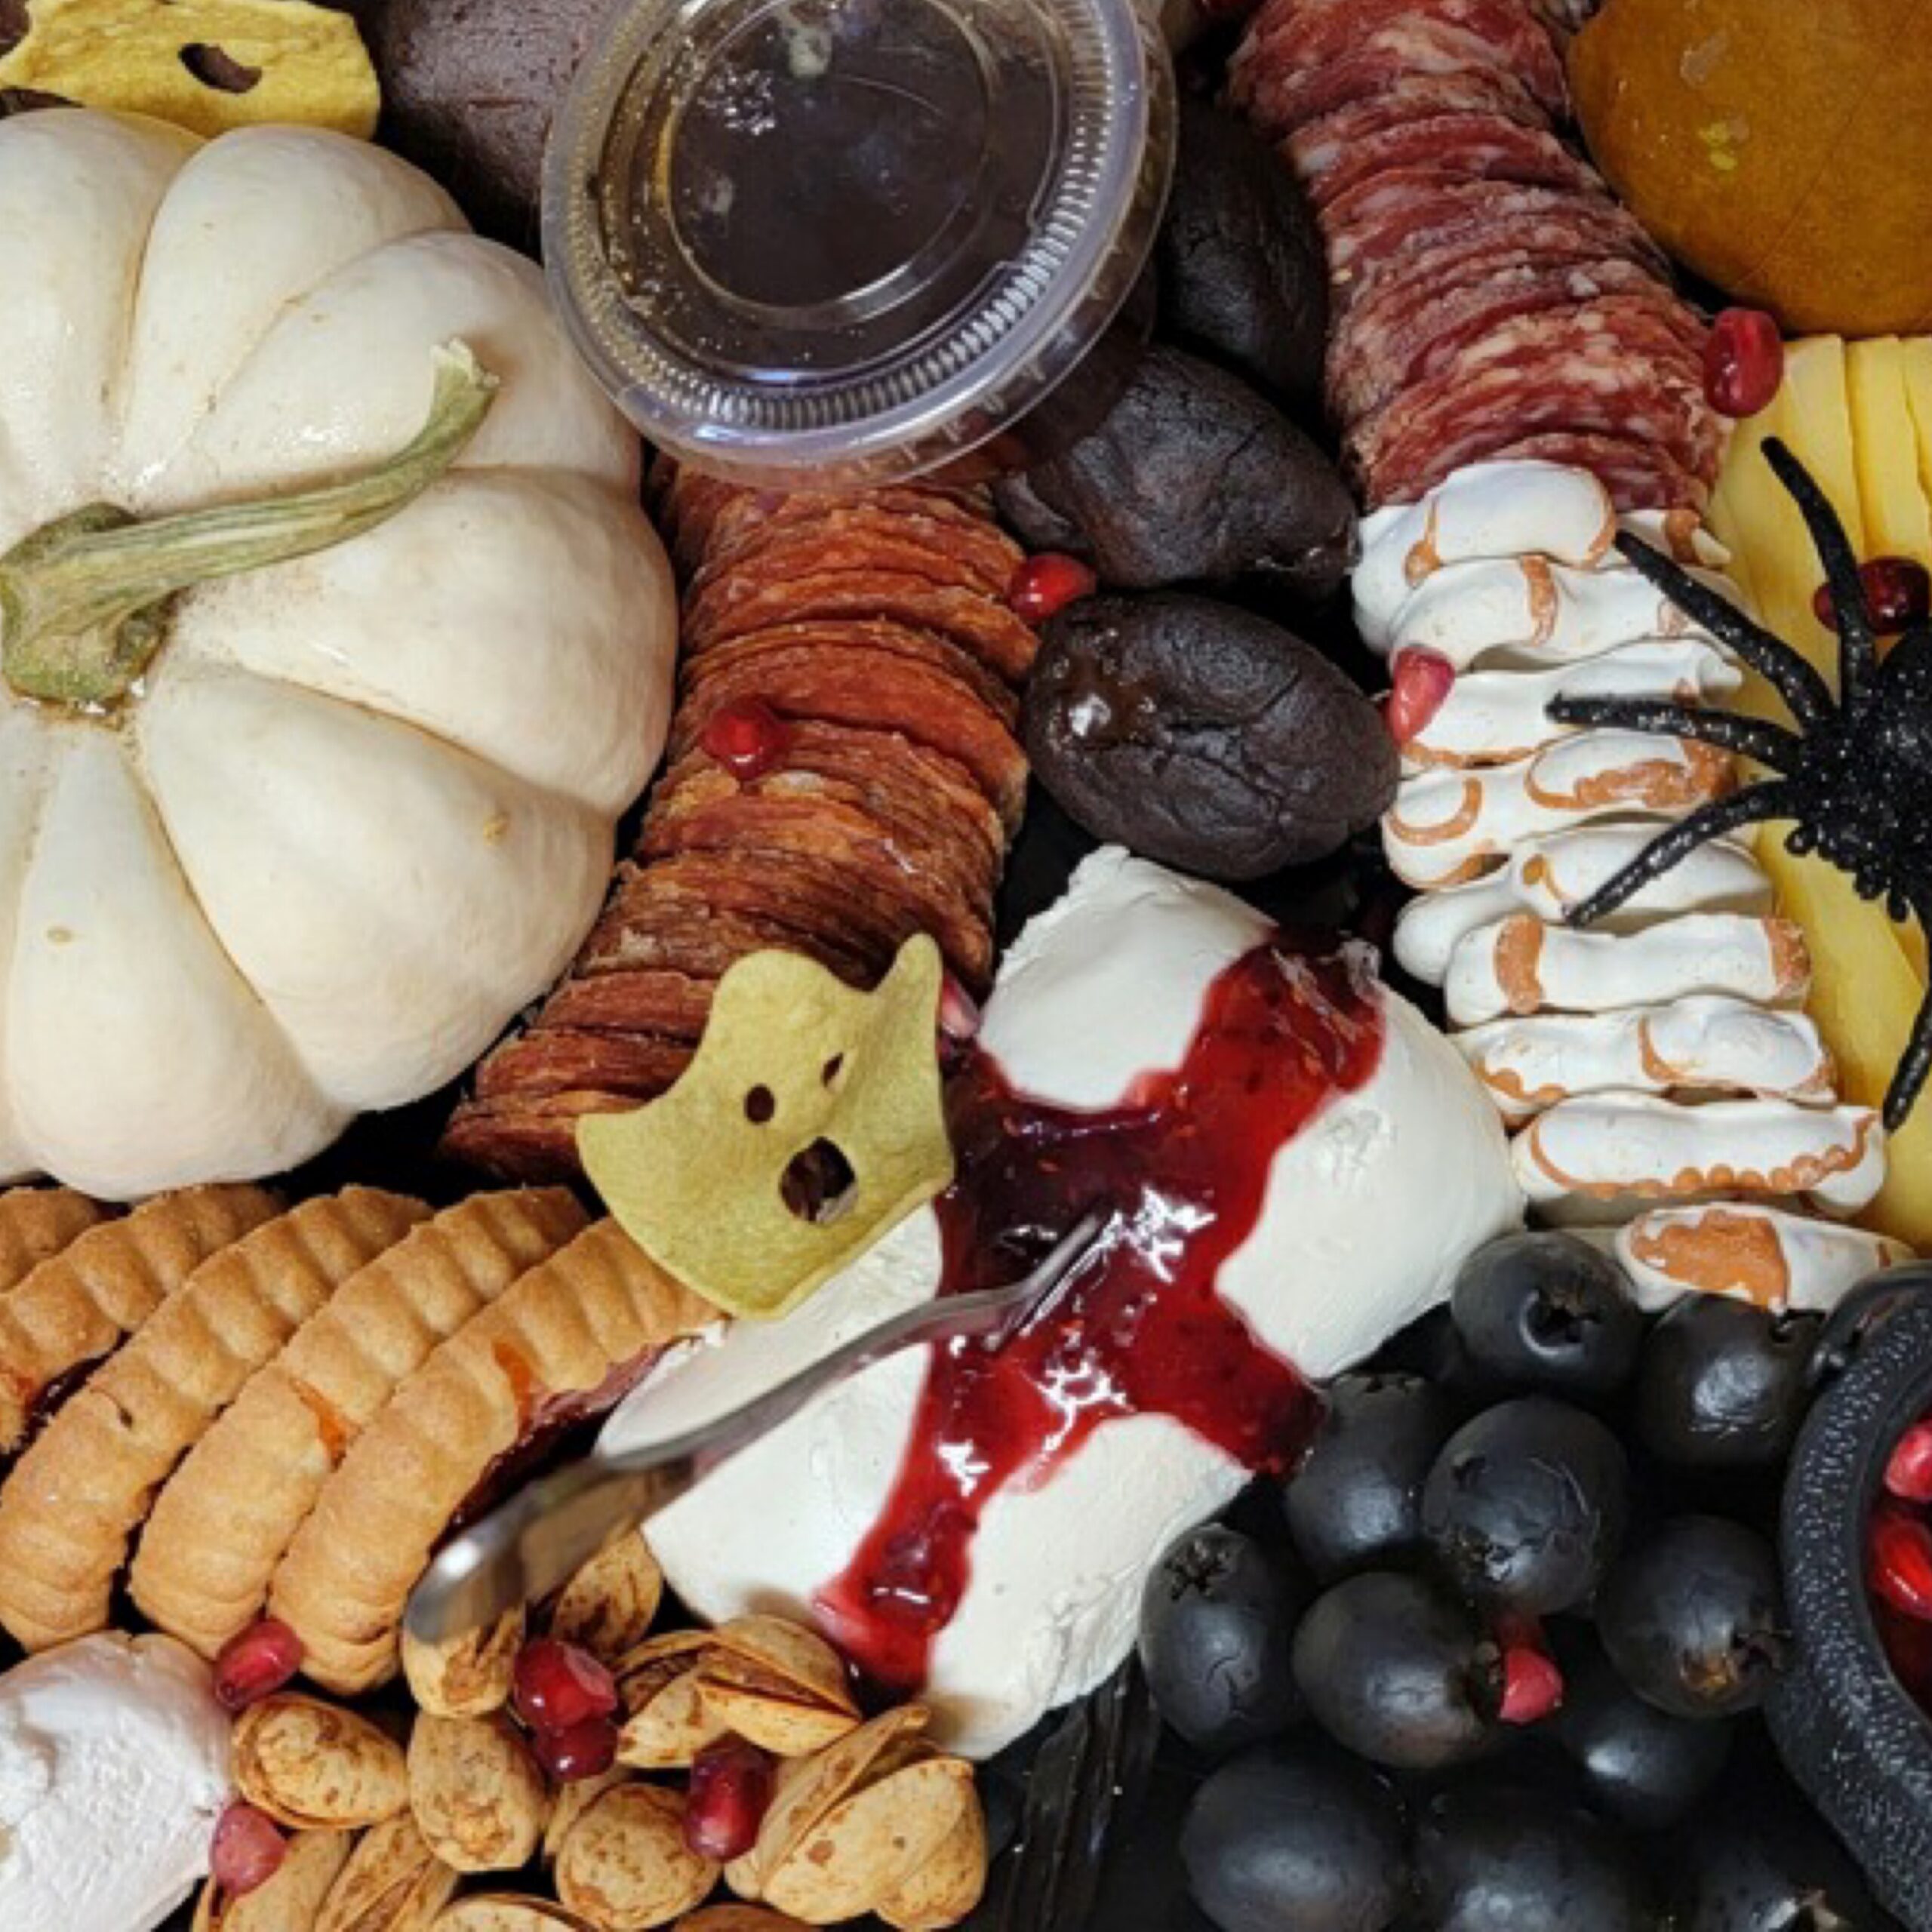 The Spooktacular Charcuterie class for beginners October 4th